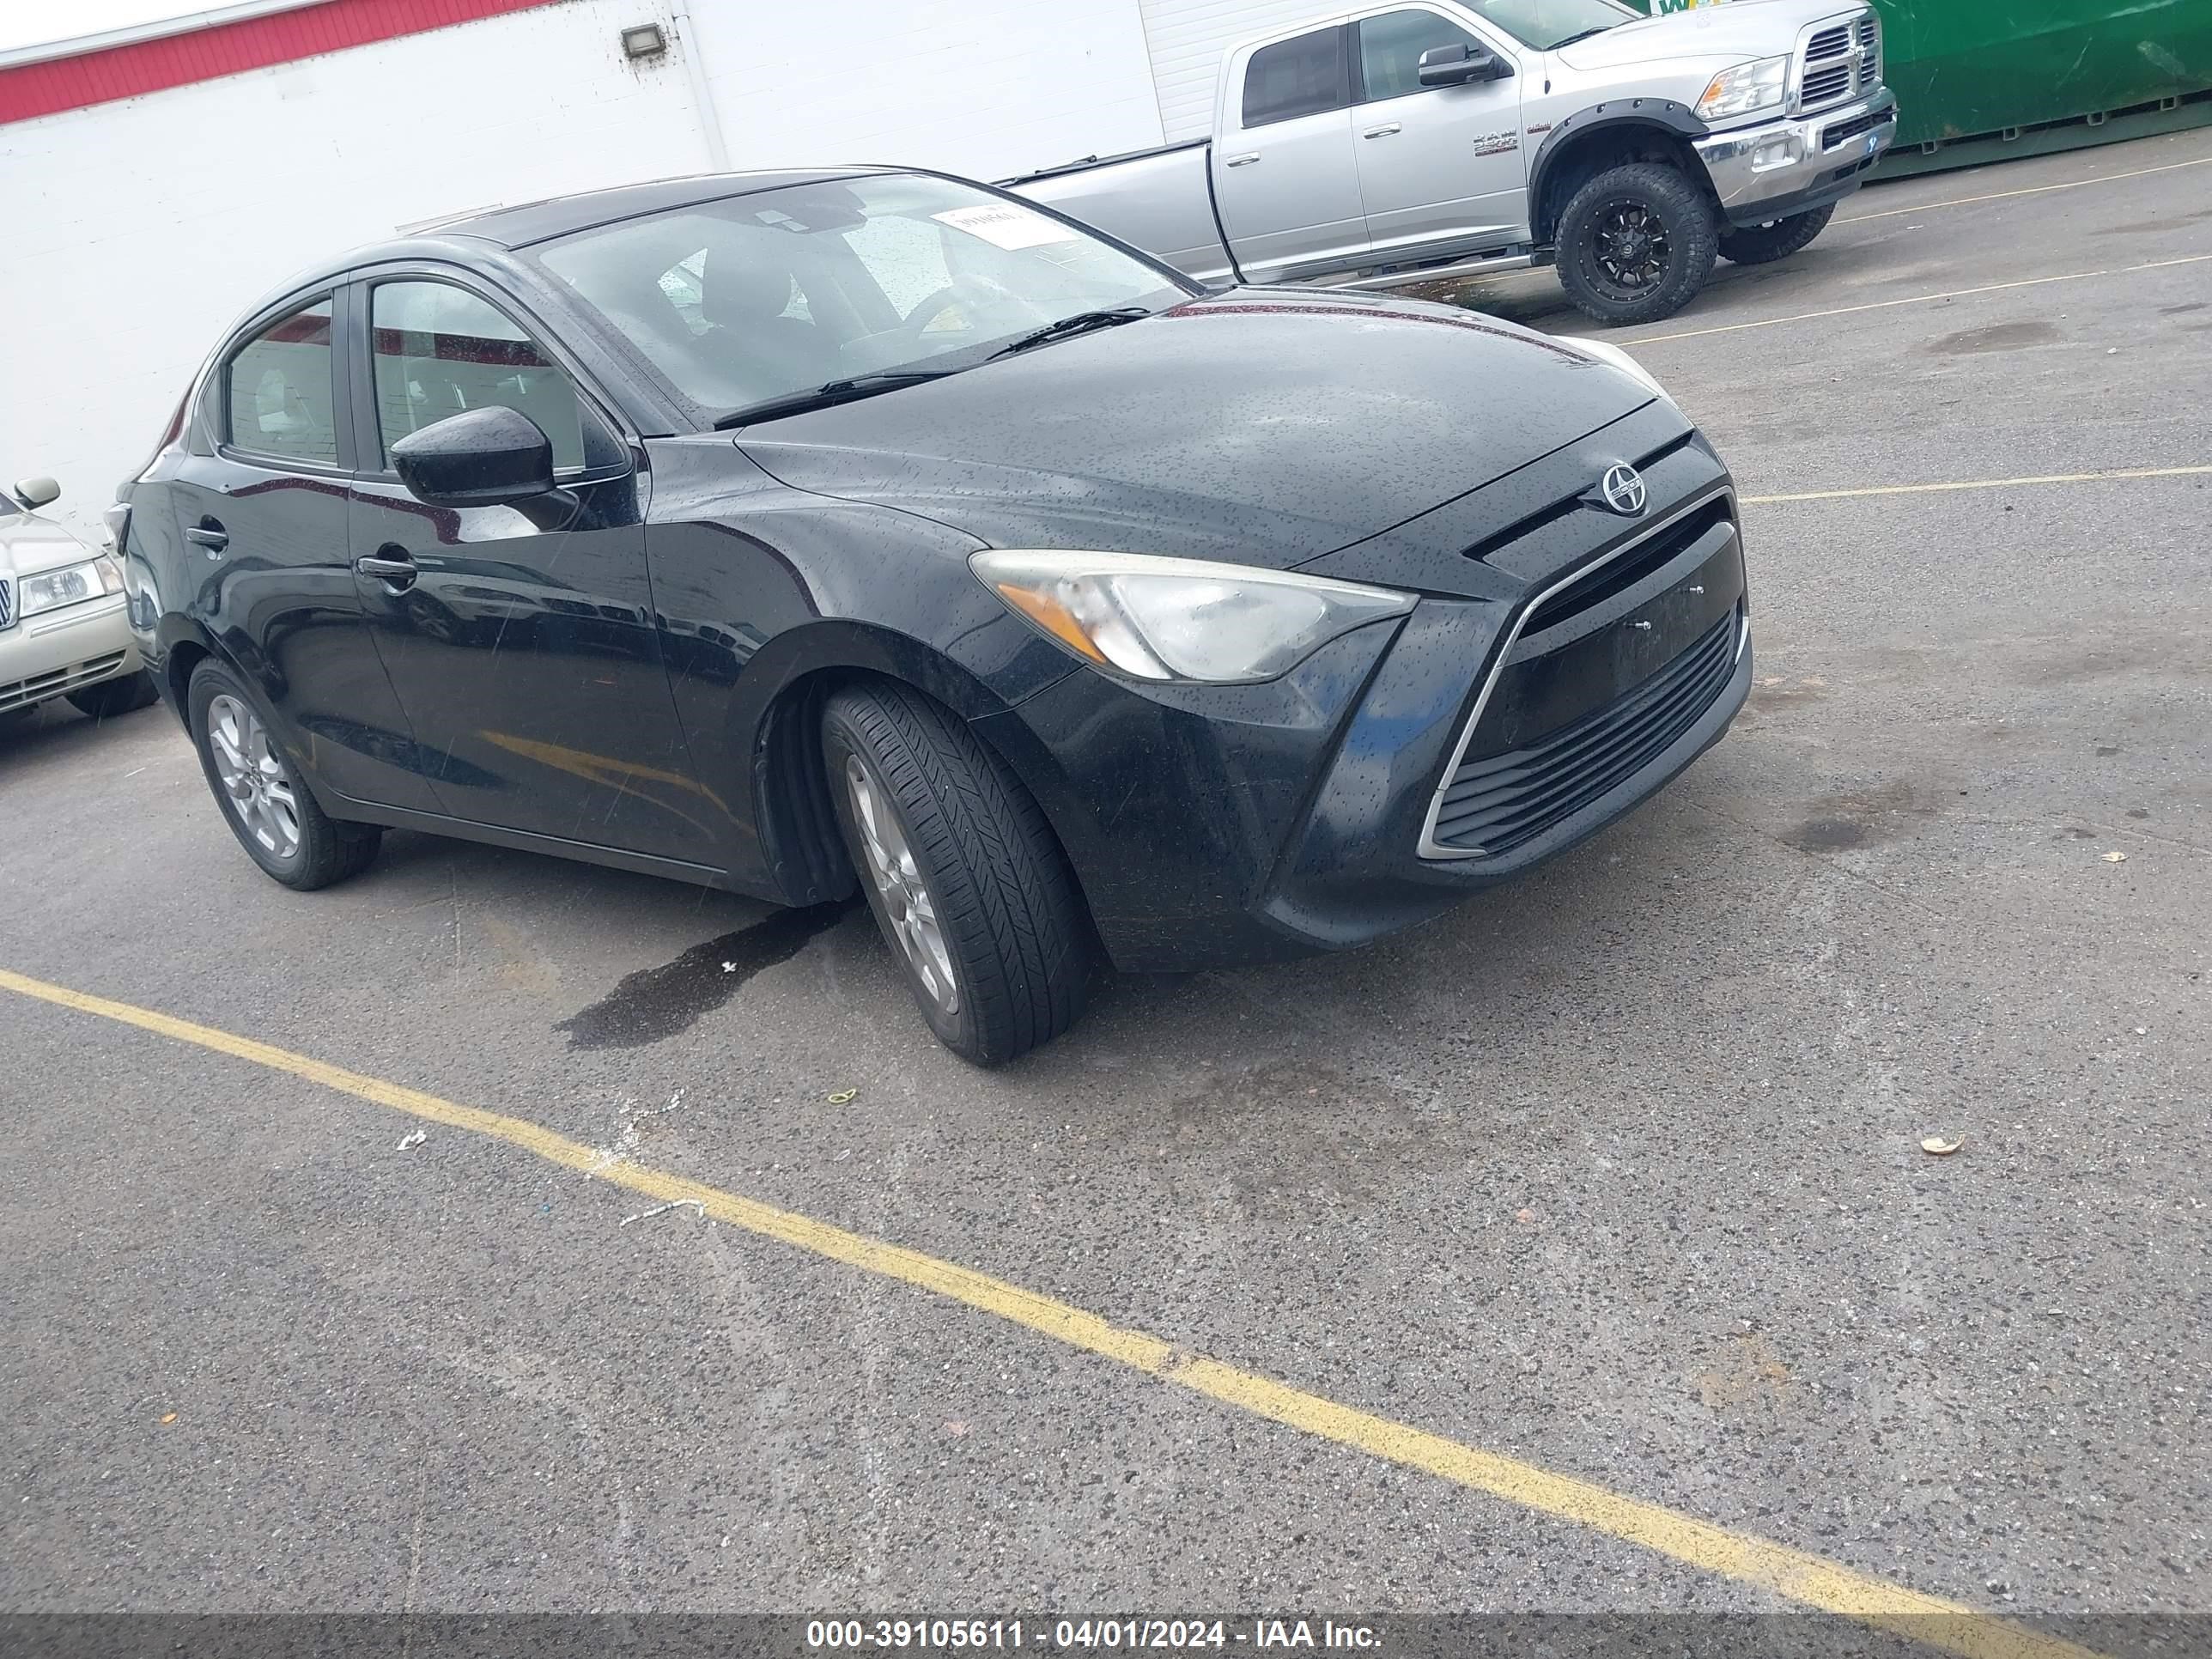 vin: 3MYDLBZV0GY111832 3MYDLBZV0GY111832 2016 scion ia 1500 for Sale in 84401, 1800 South 1100 West, Ogden, Utah, USA